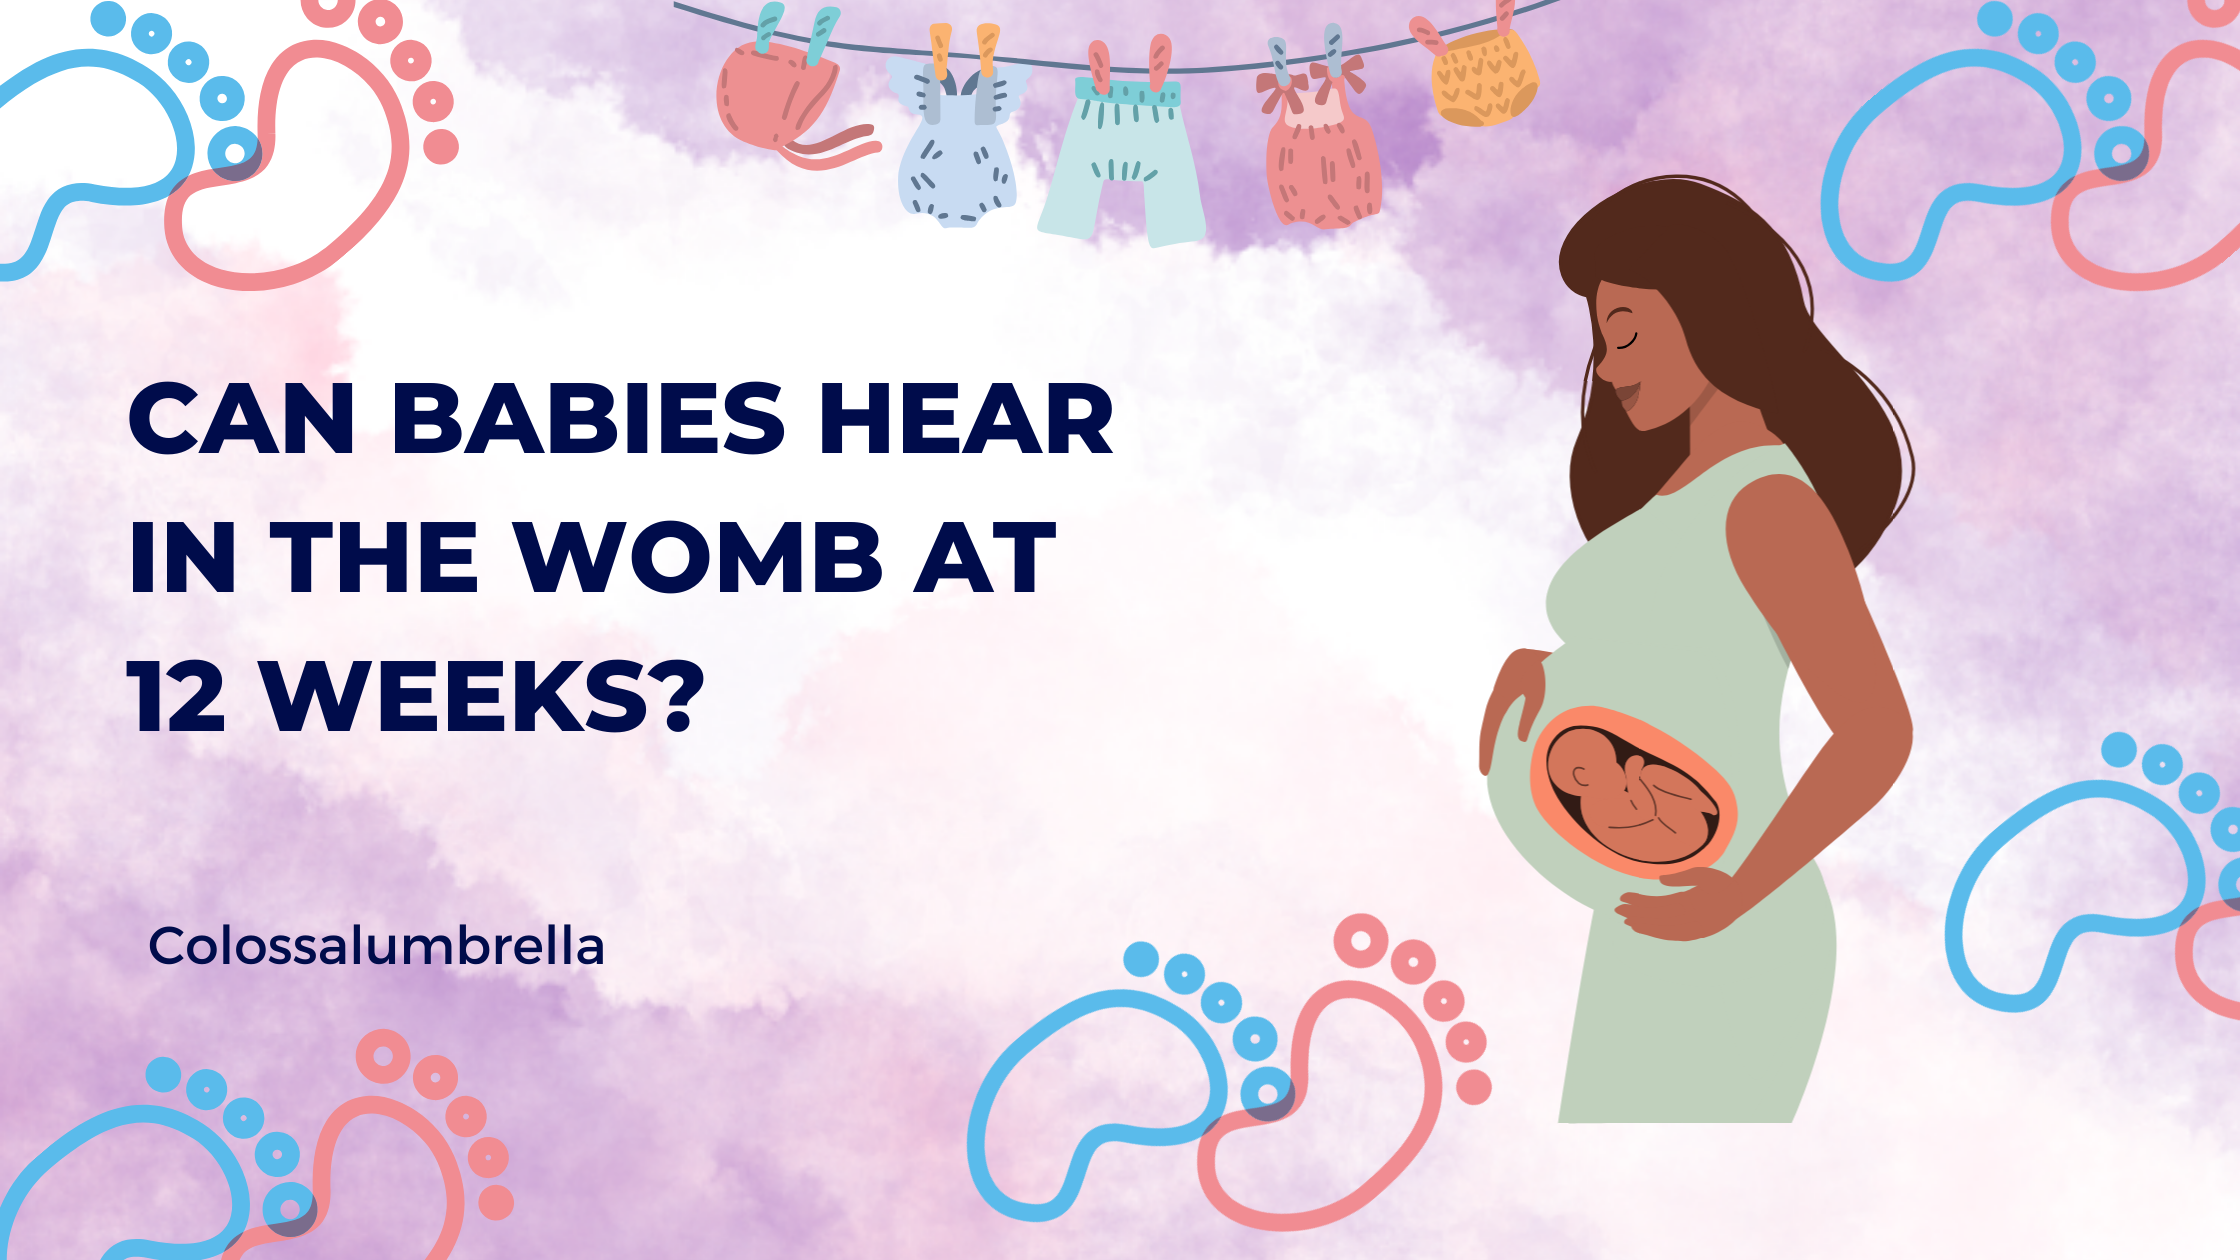 Can Babies Hear in the Womb at 12 Weeks?